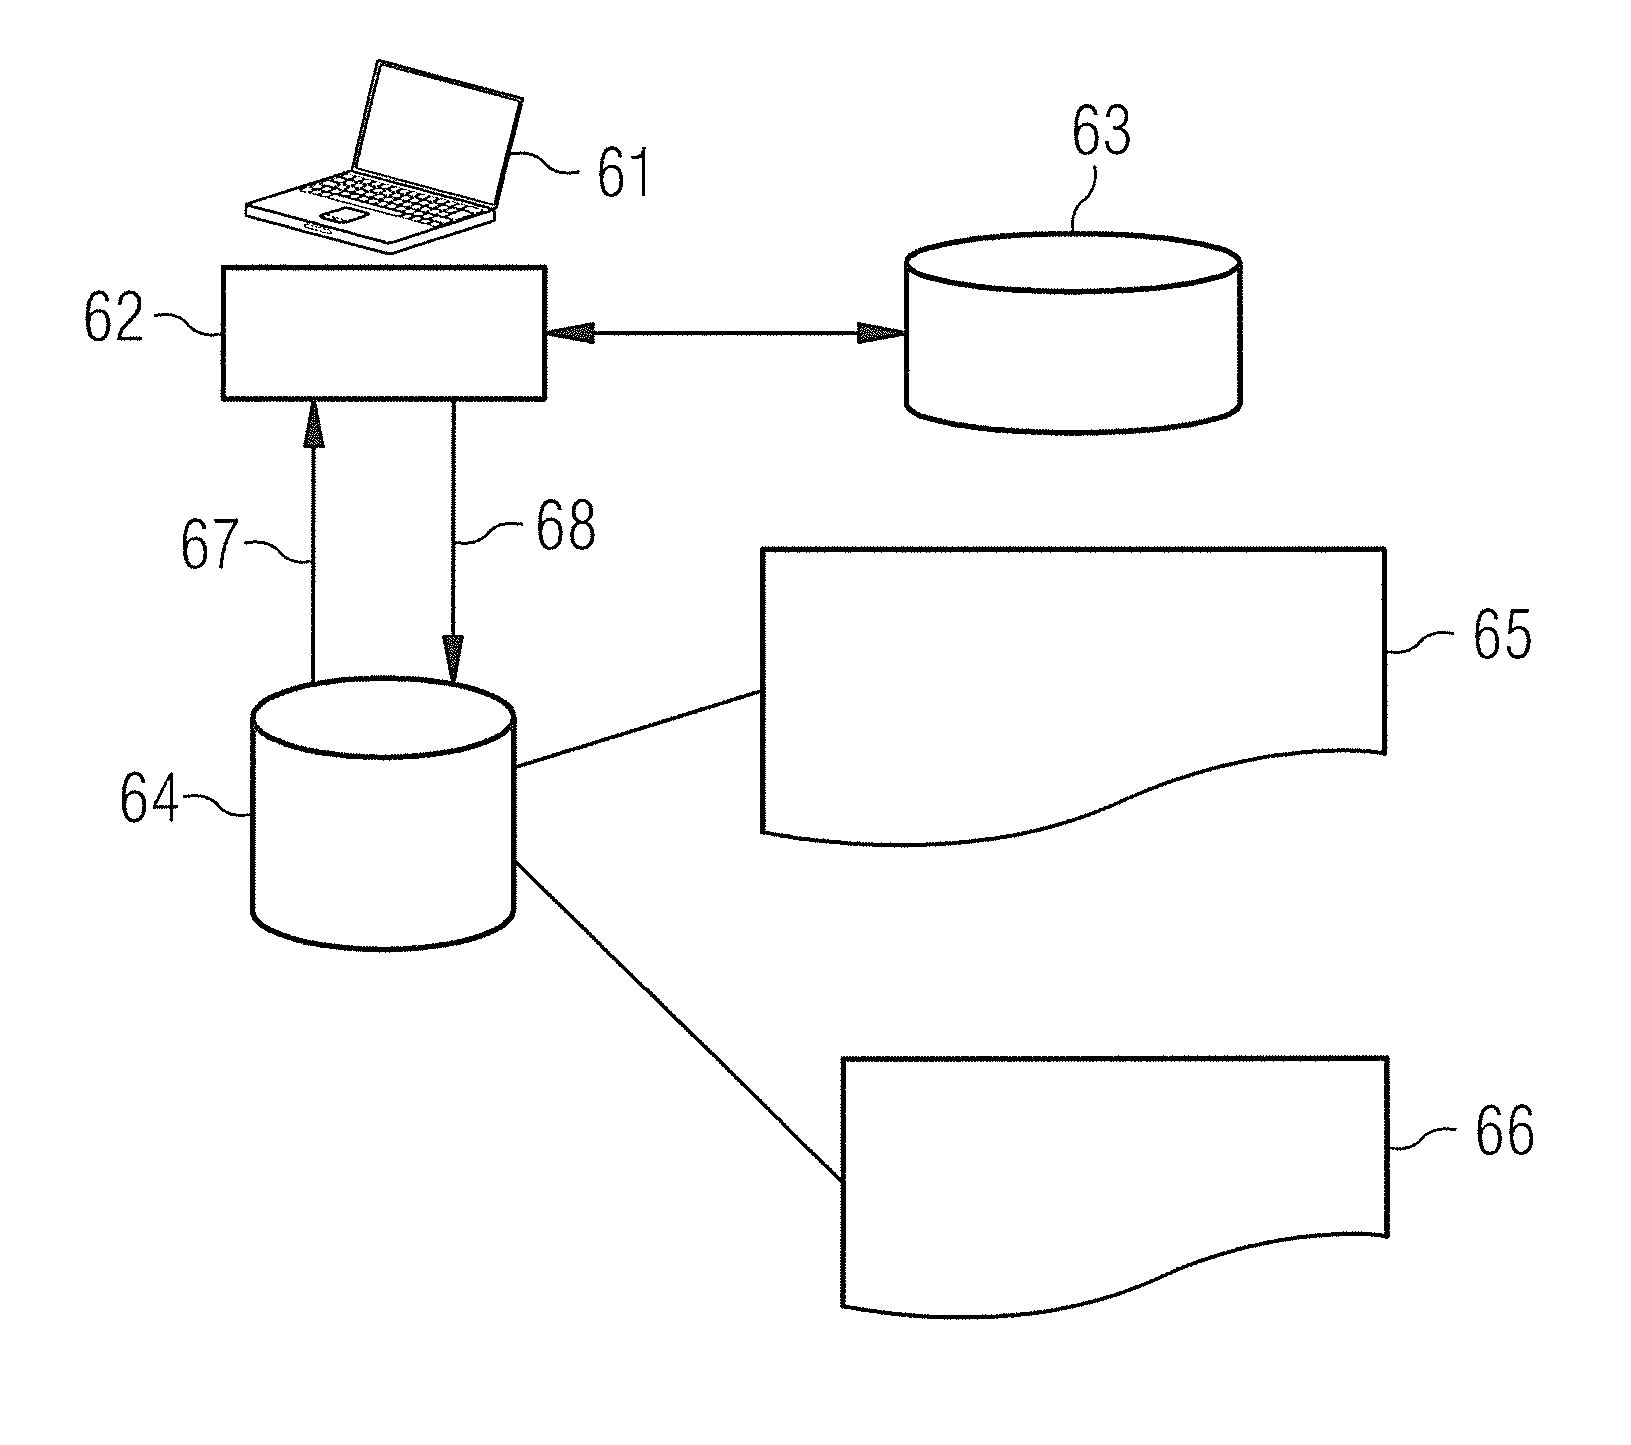 Method to configure an imaging device